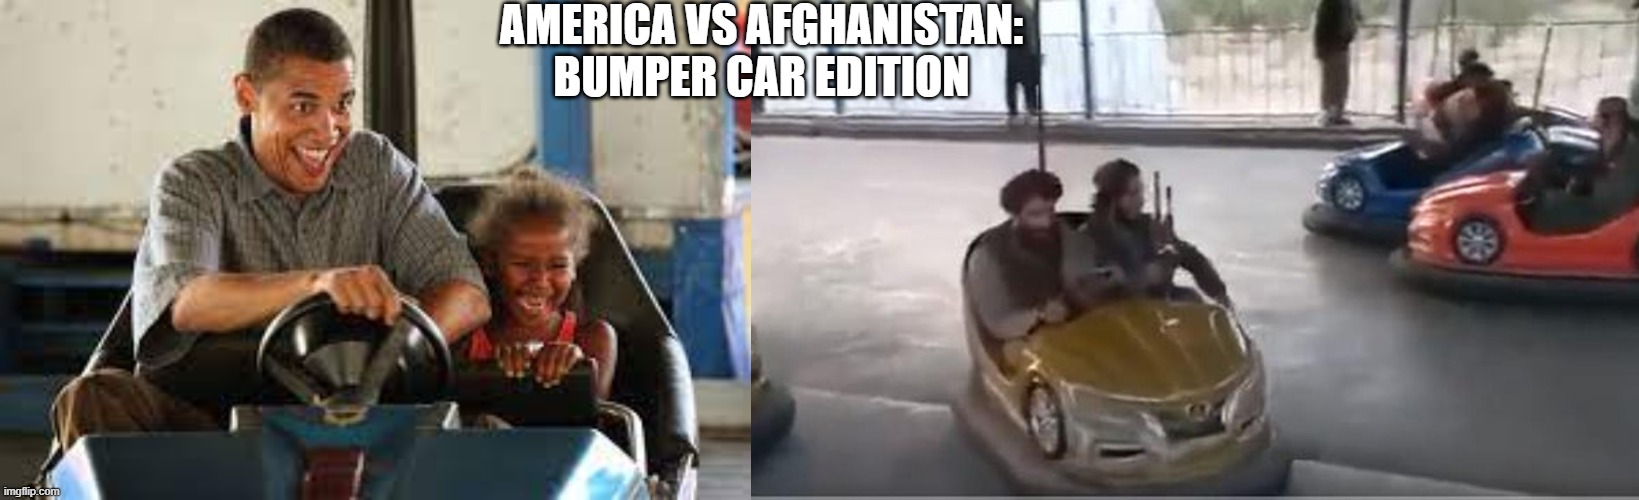 AMERICA VS LOLIBAN BUMPER CARS | AMERICA VS AFGHANISTAN: BUMPER CAR EDITION | image tagged in bumper cars,afghanistan,memes,india,funny,usa | made w/ Imgflip meme maker